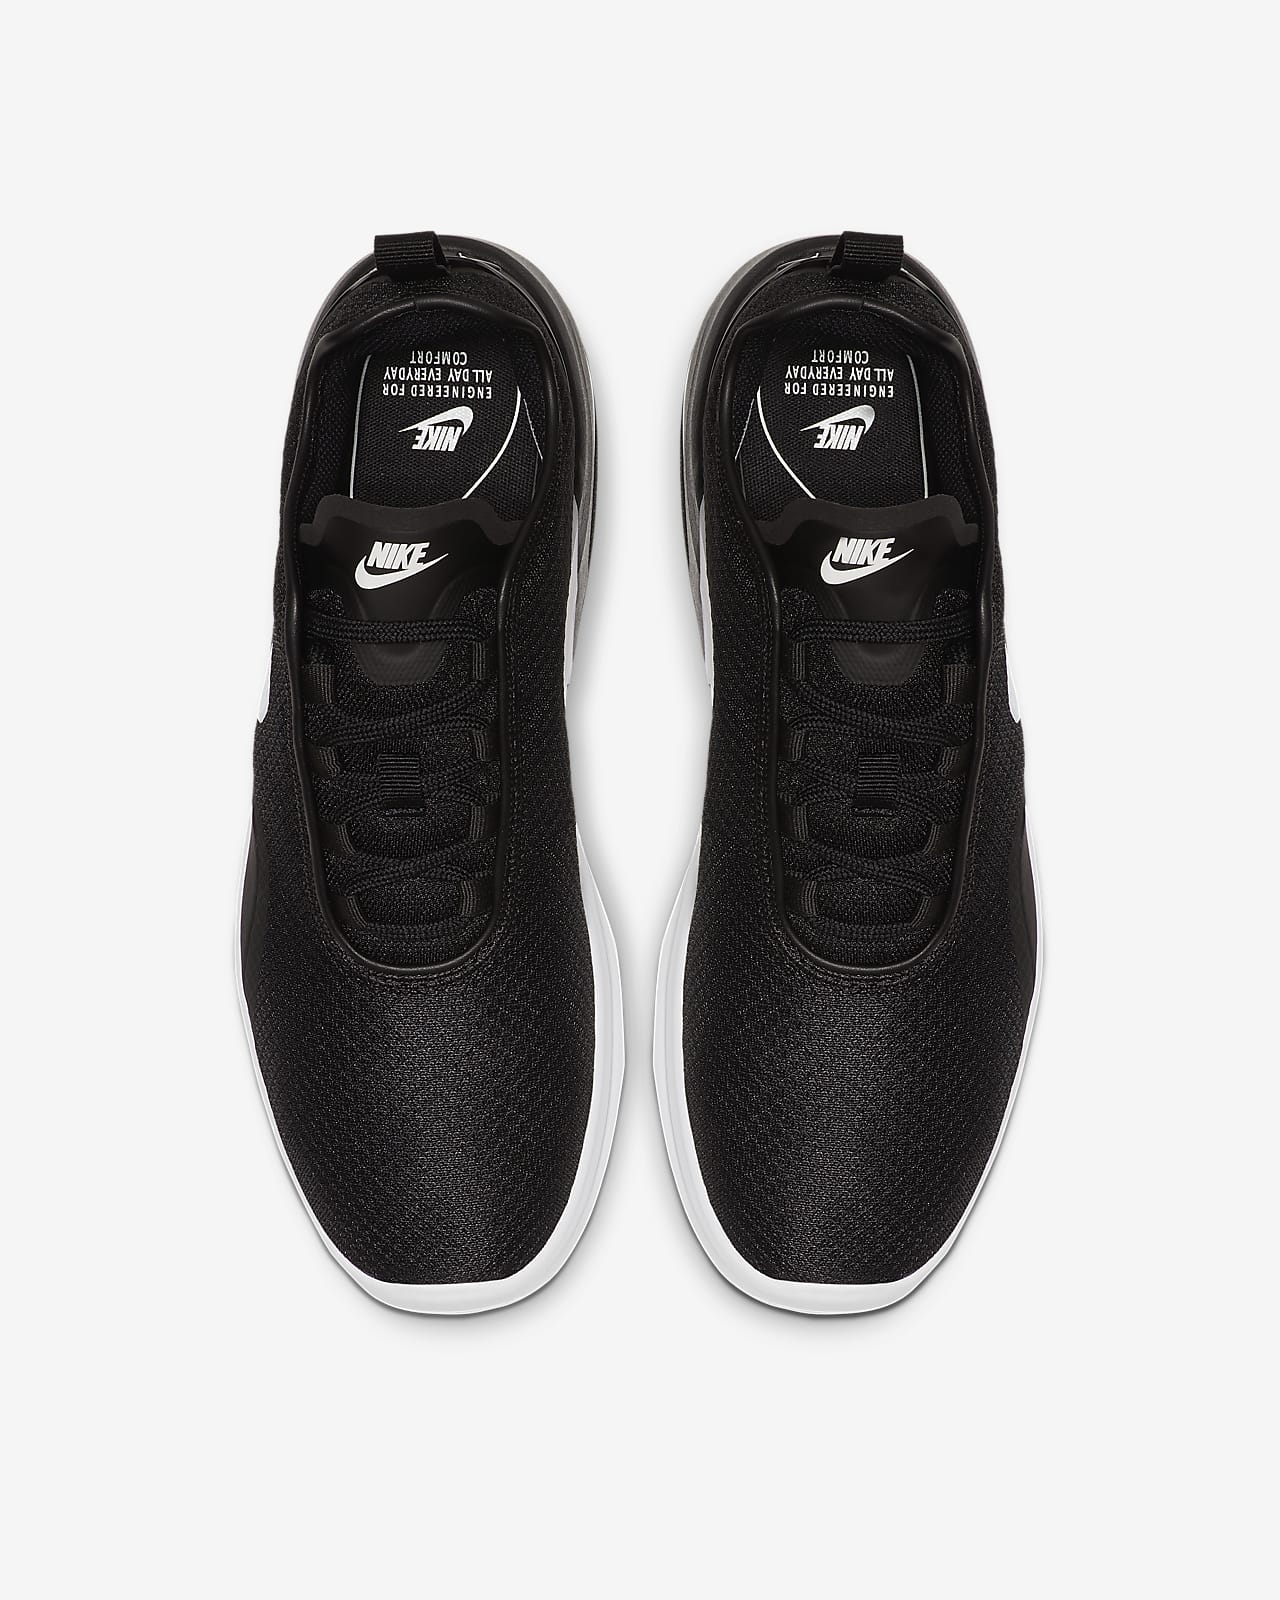 nike all day comfort online -